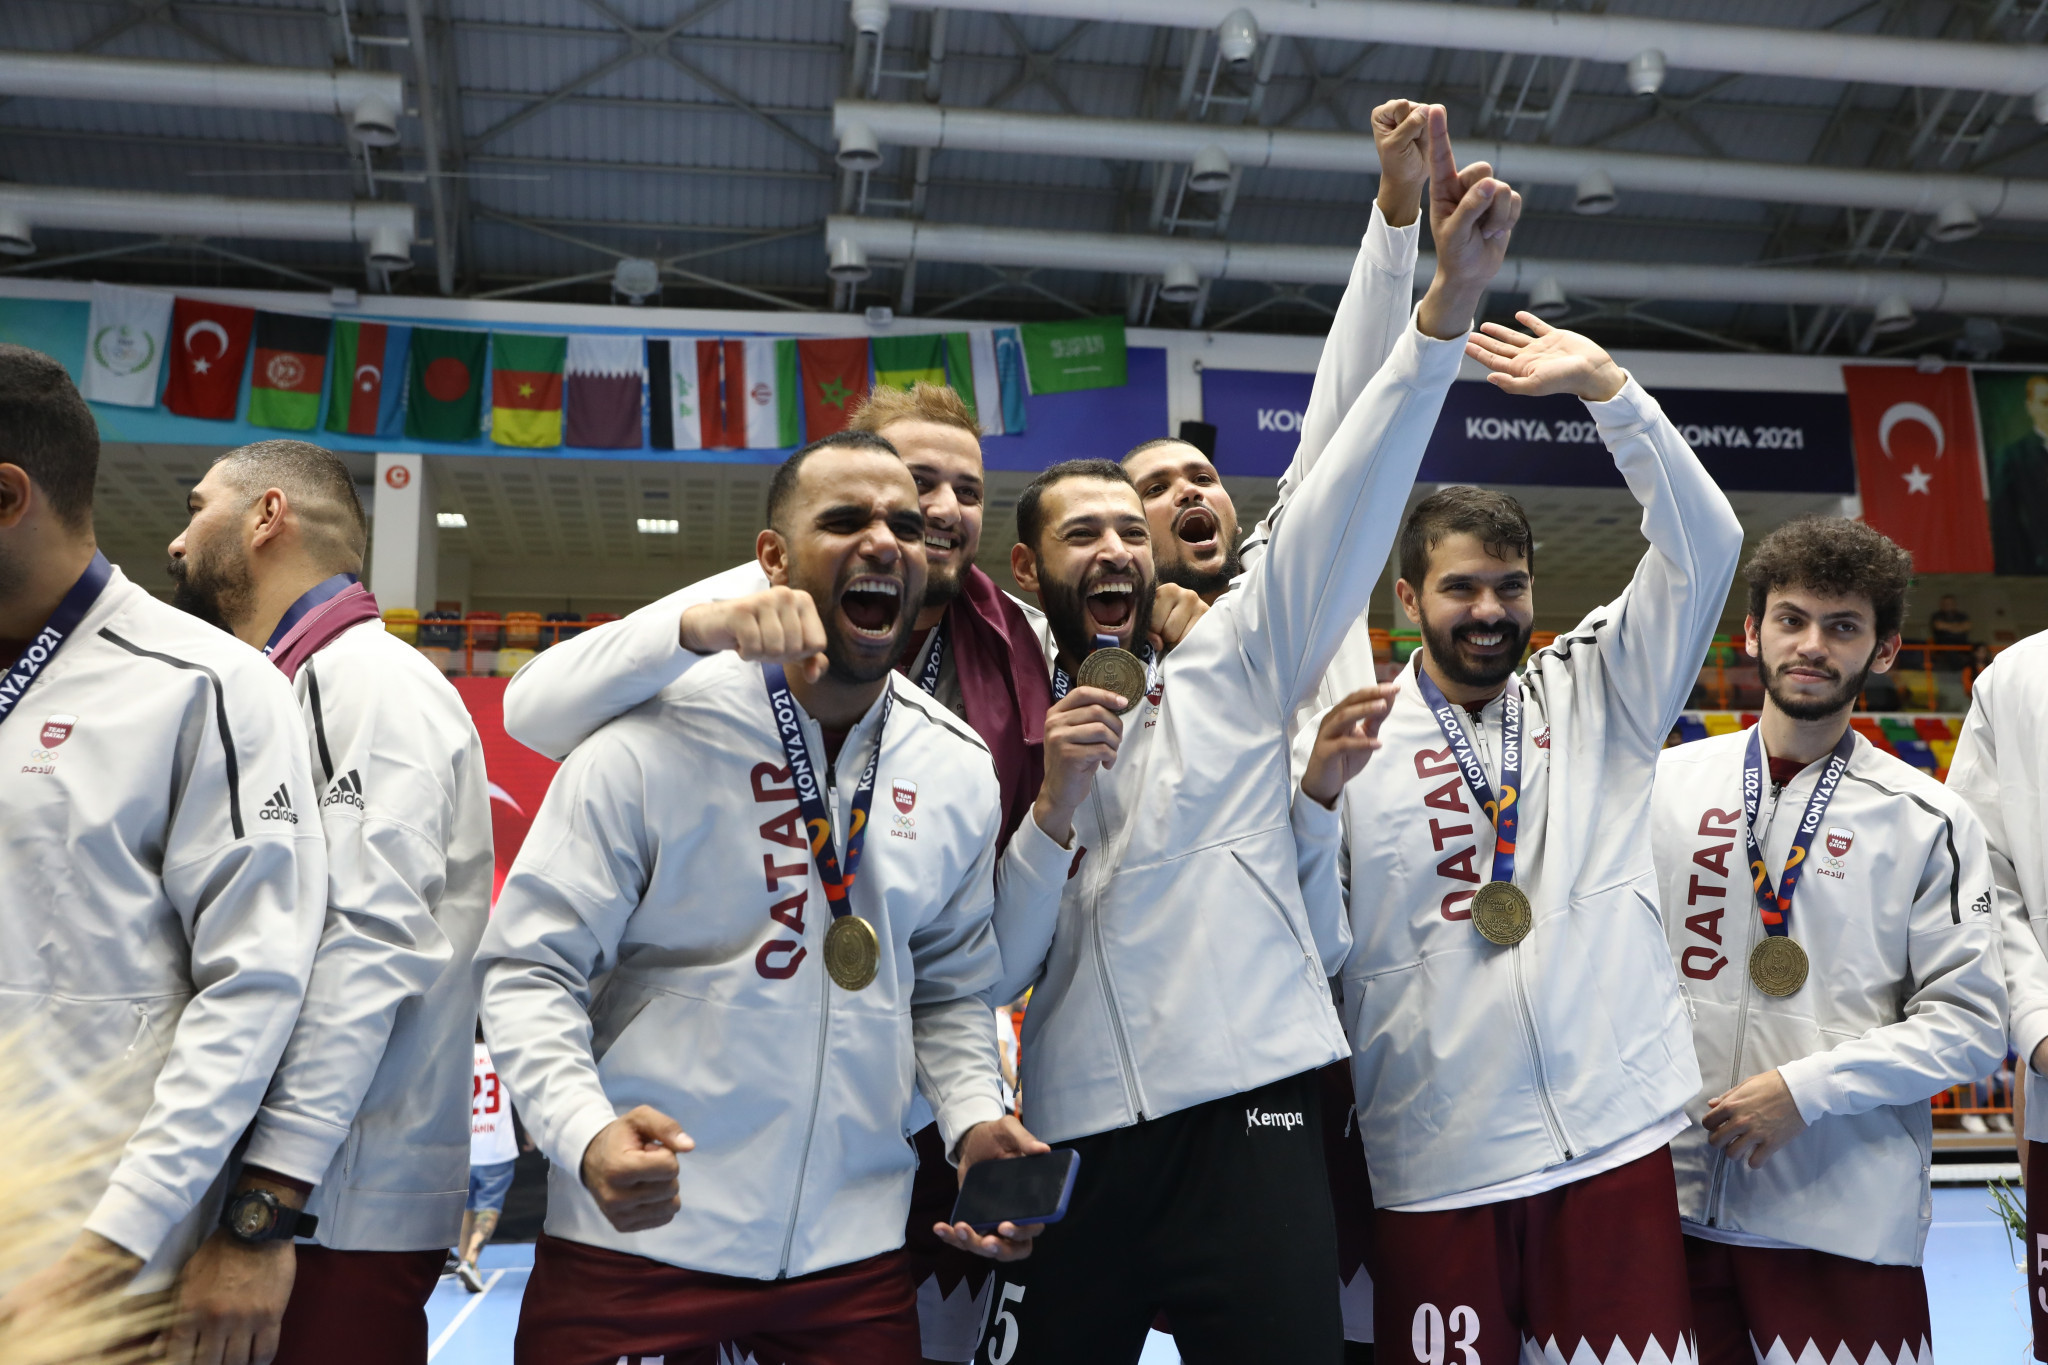 Qatar spoil Turkish party with men’s handball gold at Islamic Solidarity Games as Kazakhstan win two in the pool